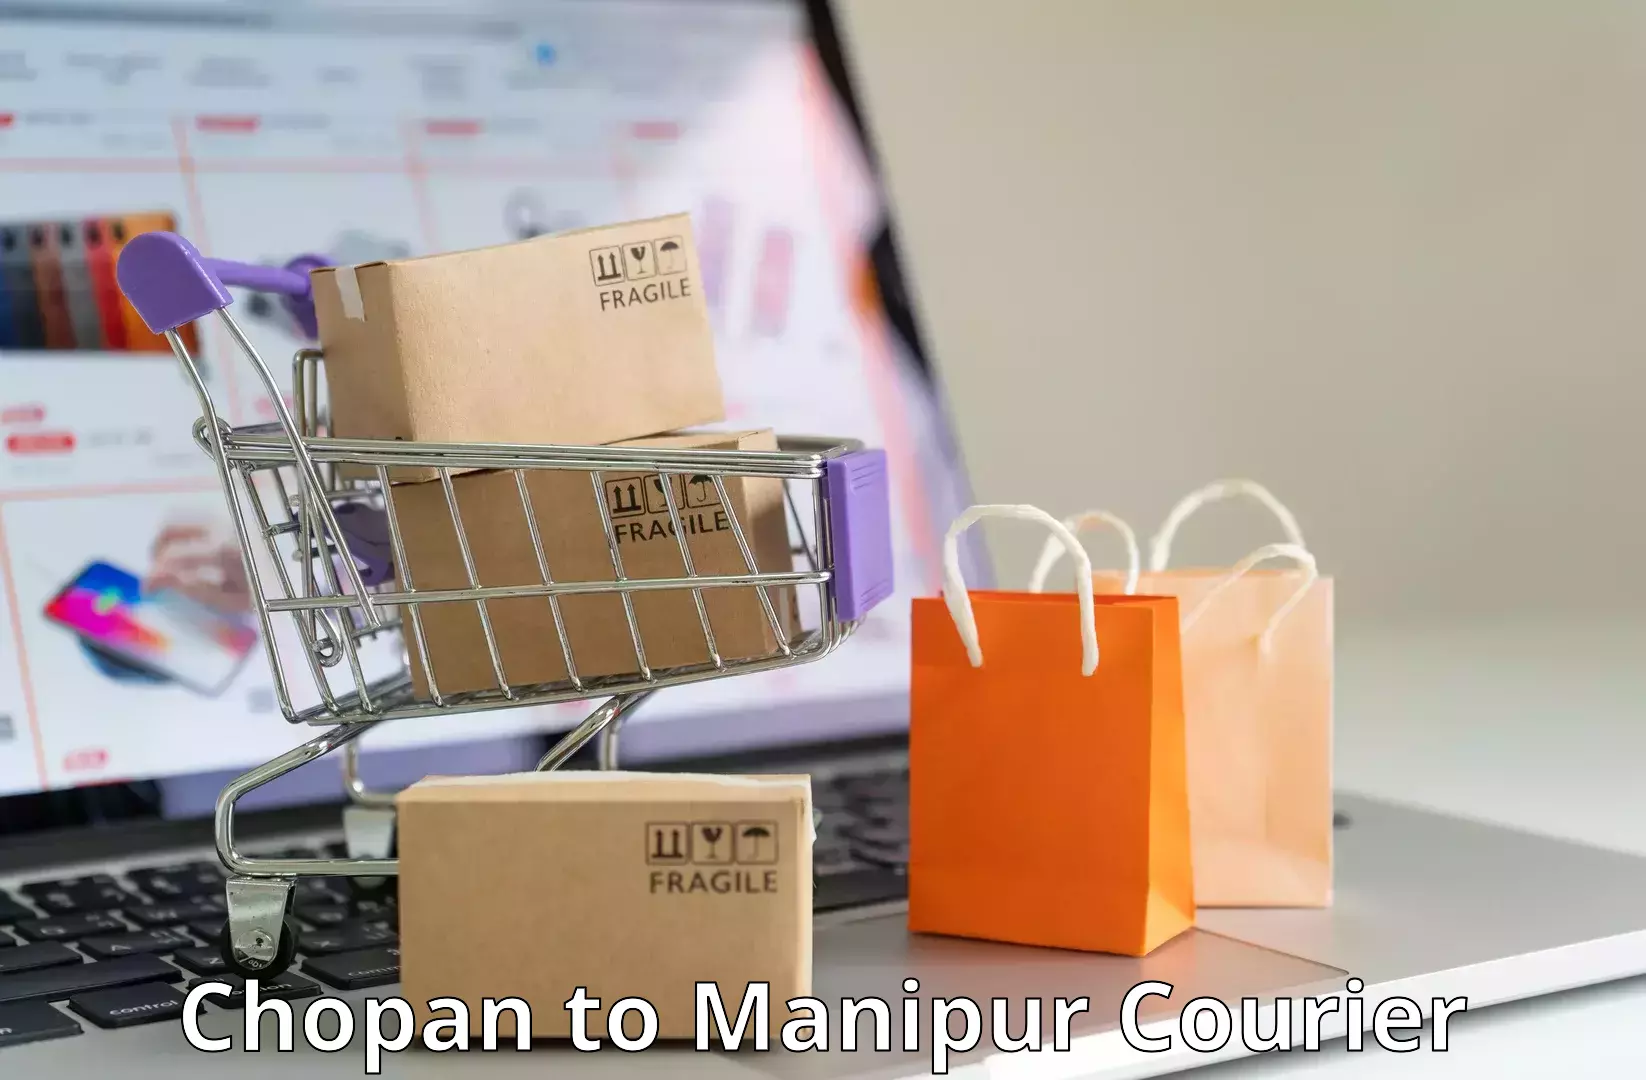 Integrated logistics solutions Chopan to Manipur